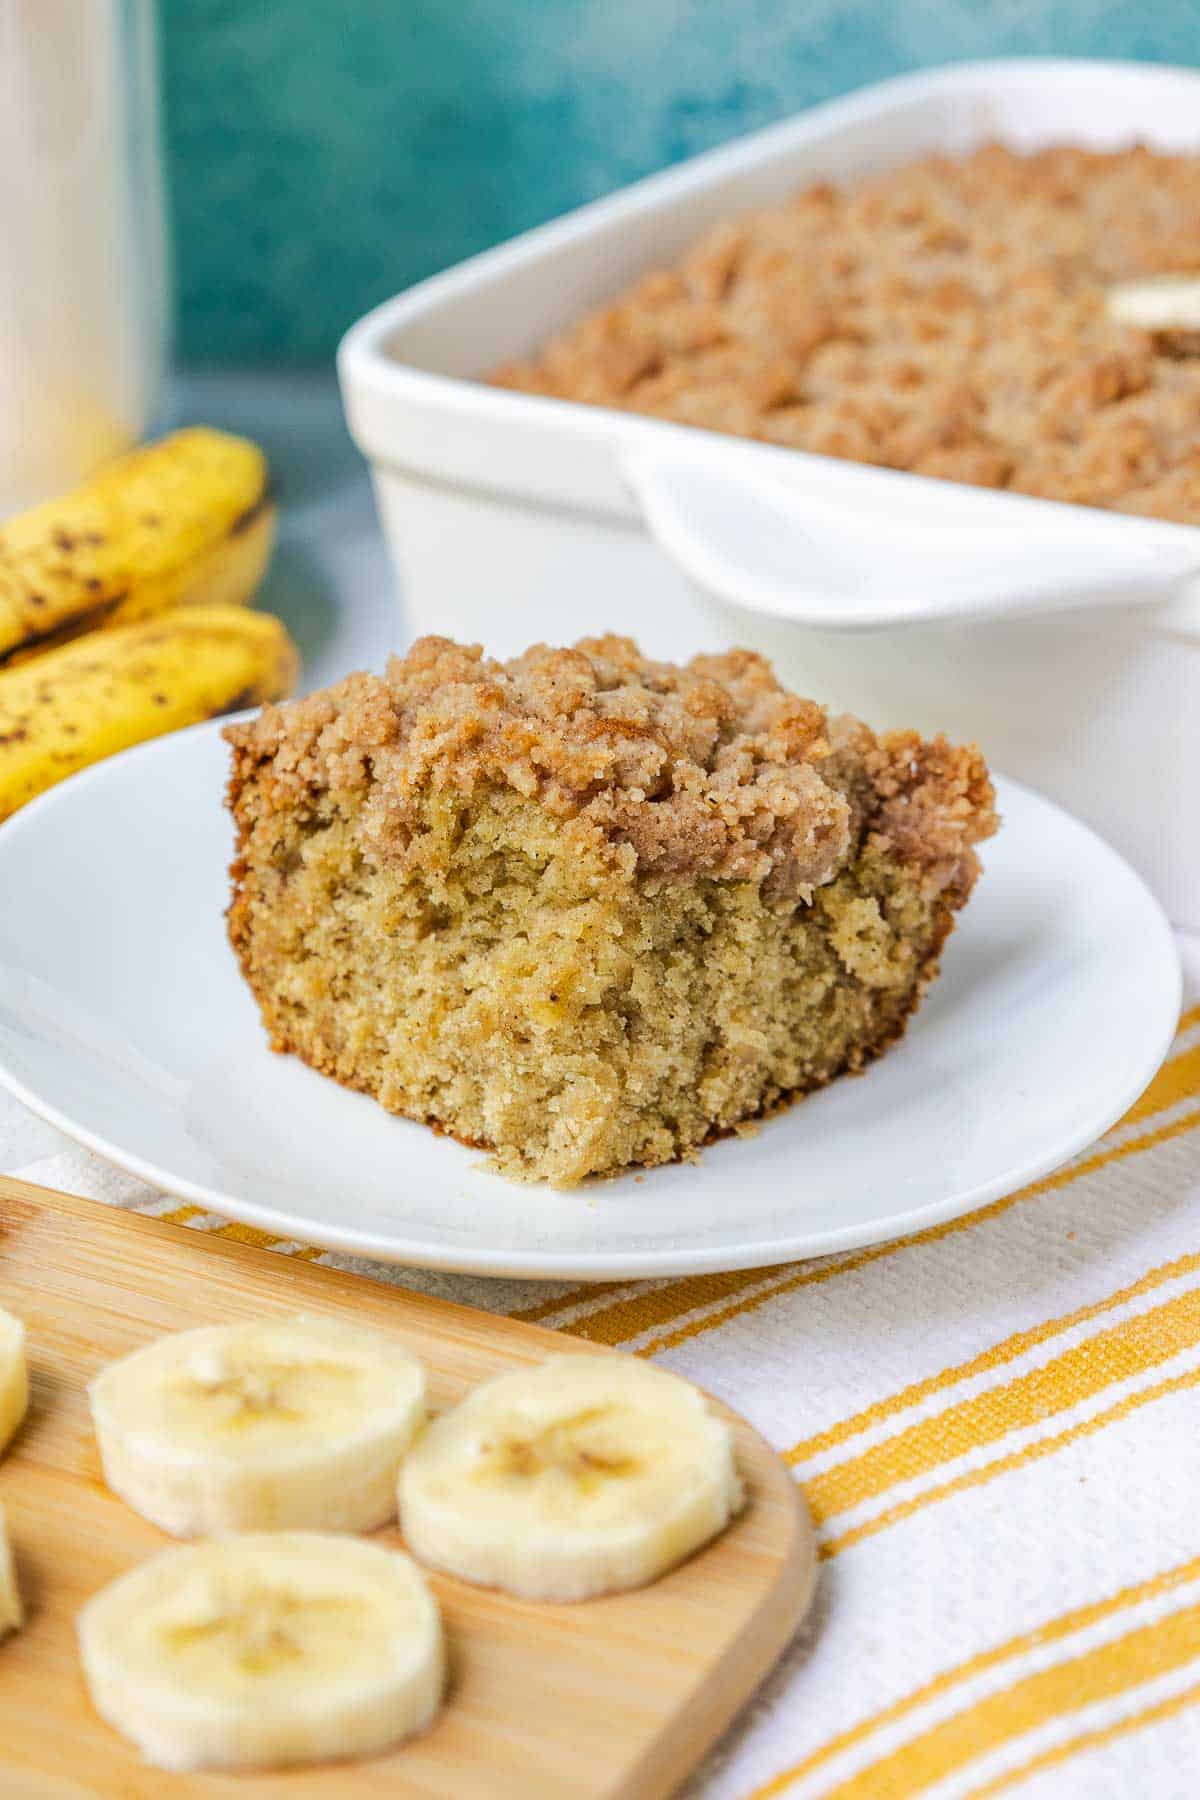 Slice of banana coffee cake with crumble topping